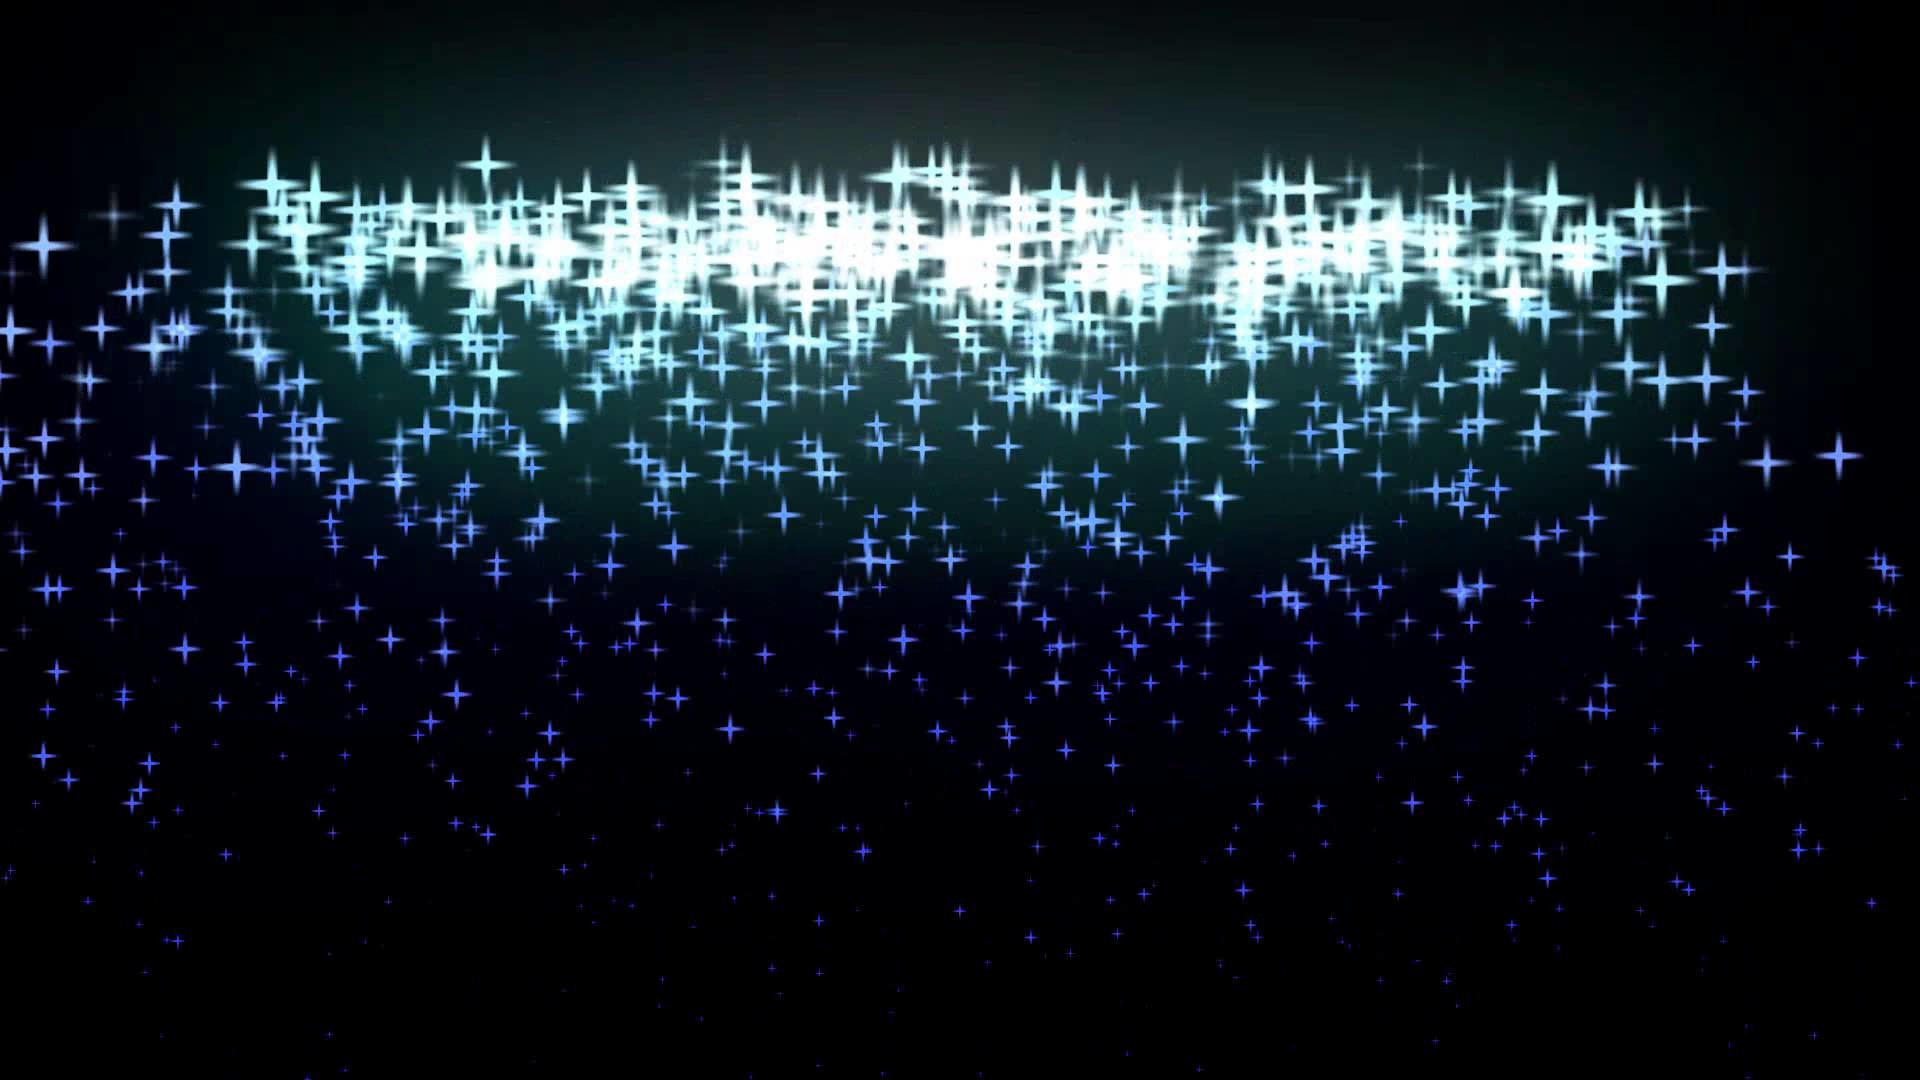 Animated Stars Wallpaper (71+ images)